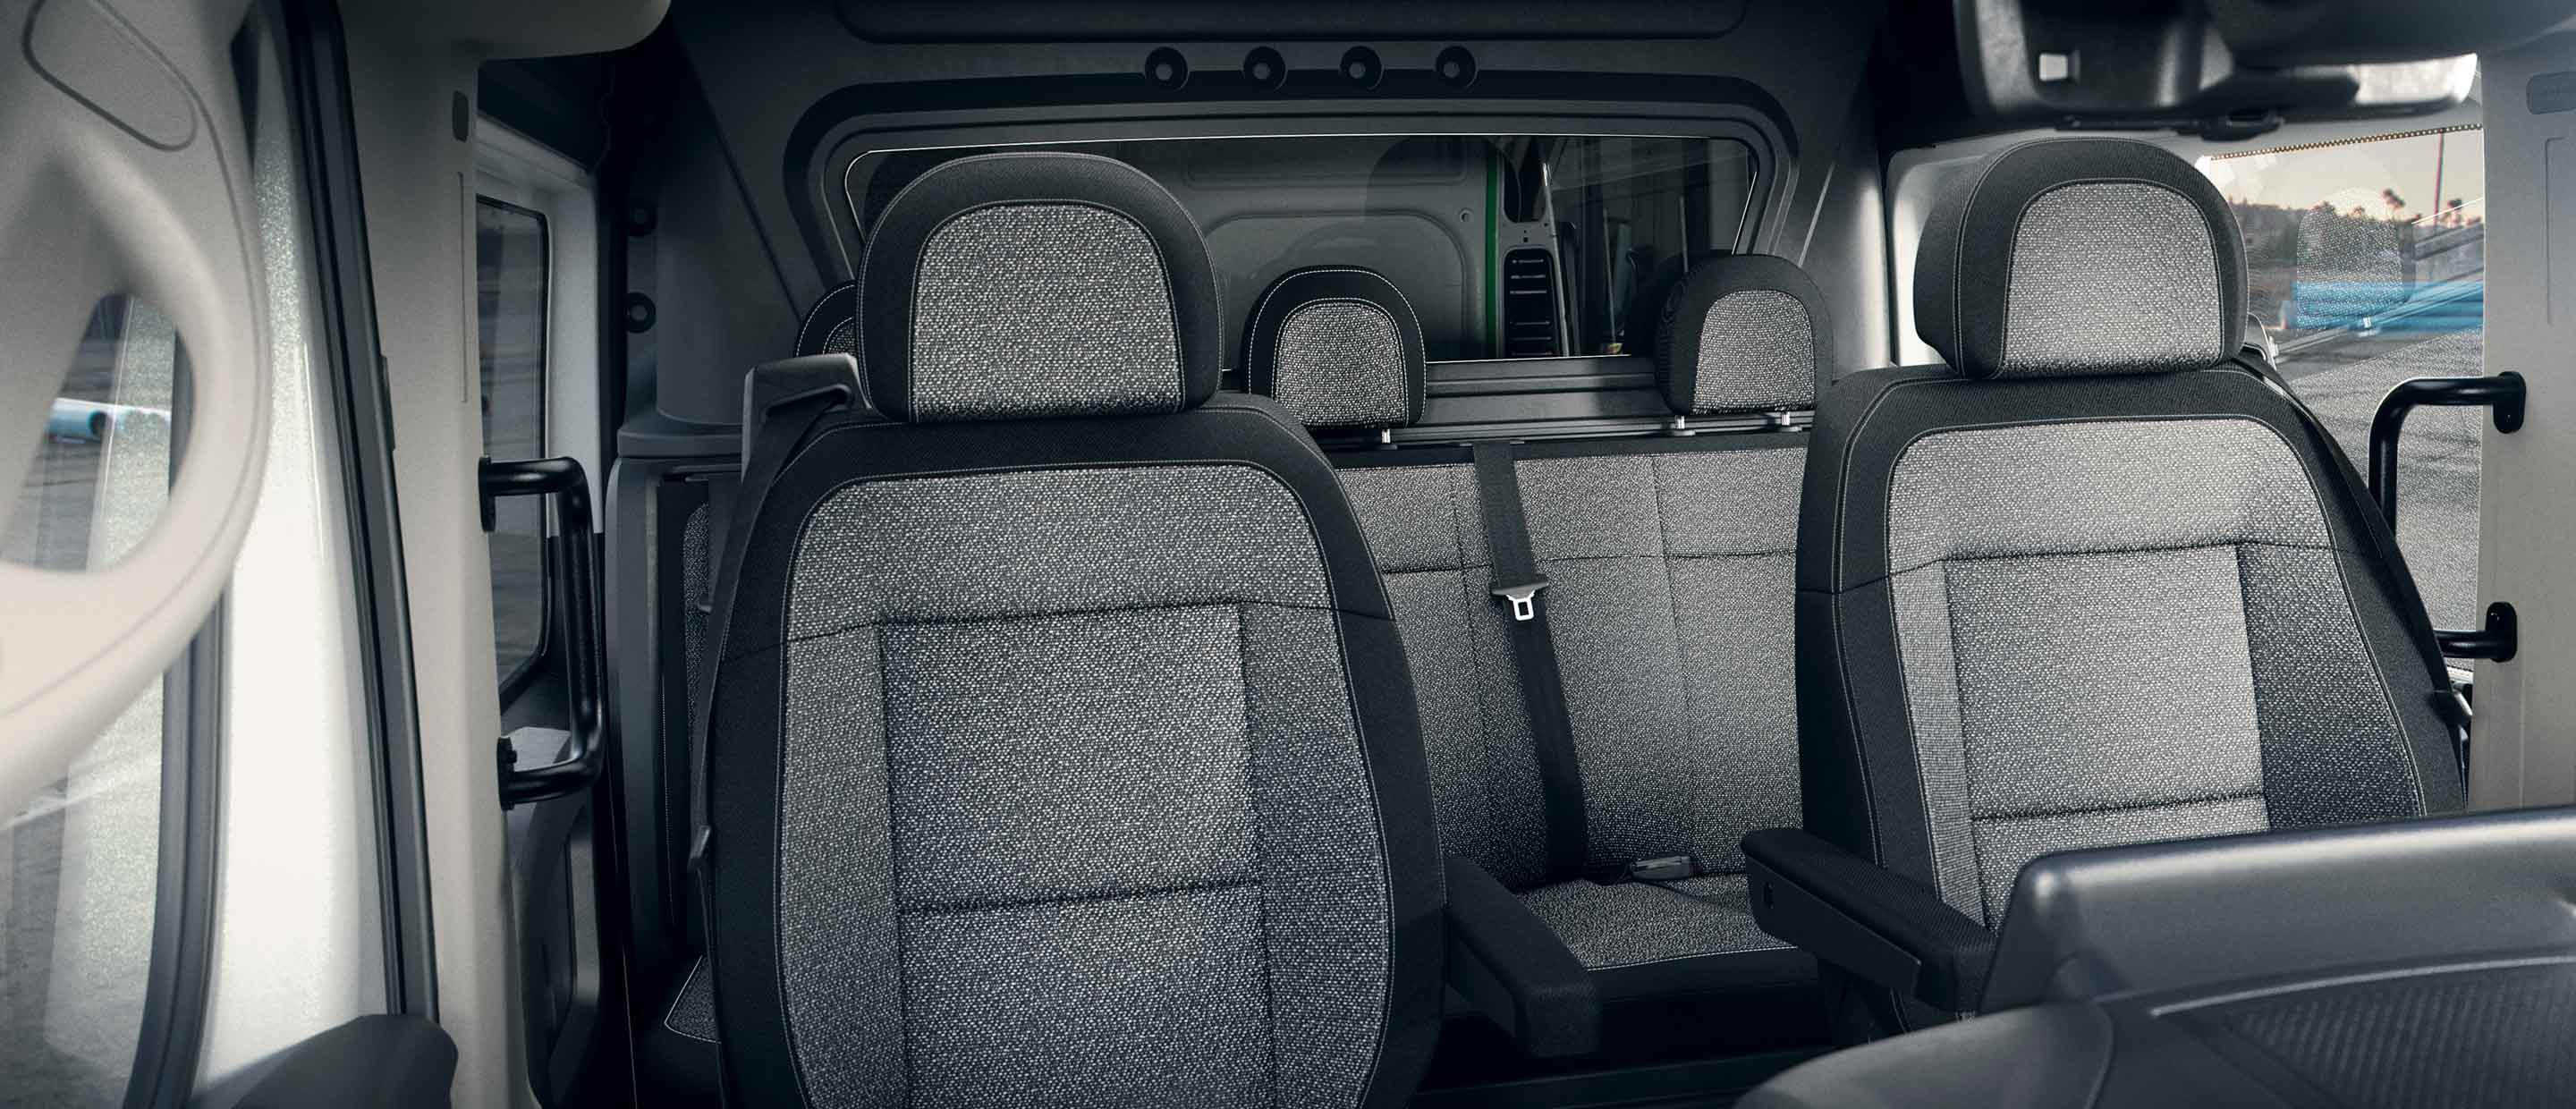 The front bucket seats and rear bench seat in the 2022 Ram ProMaster Crew Van.